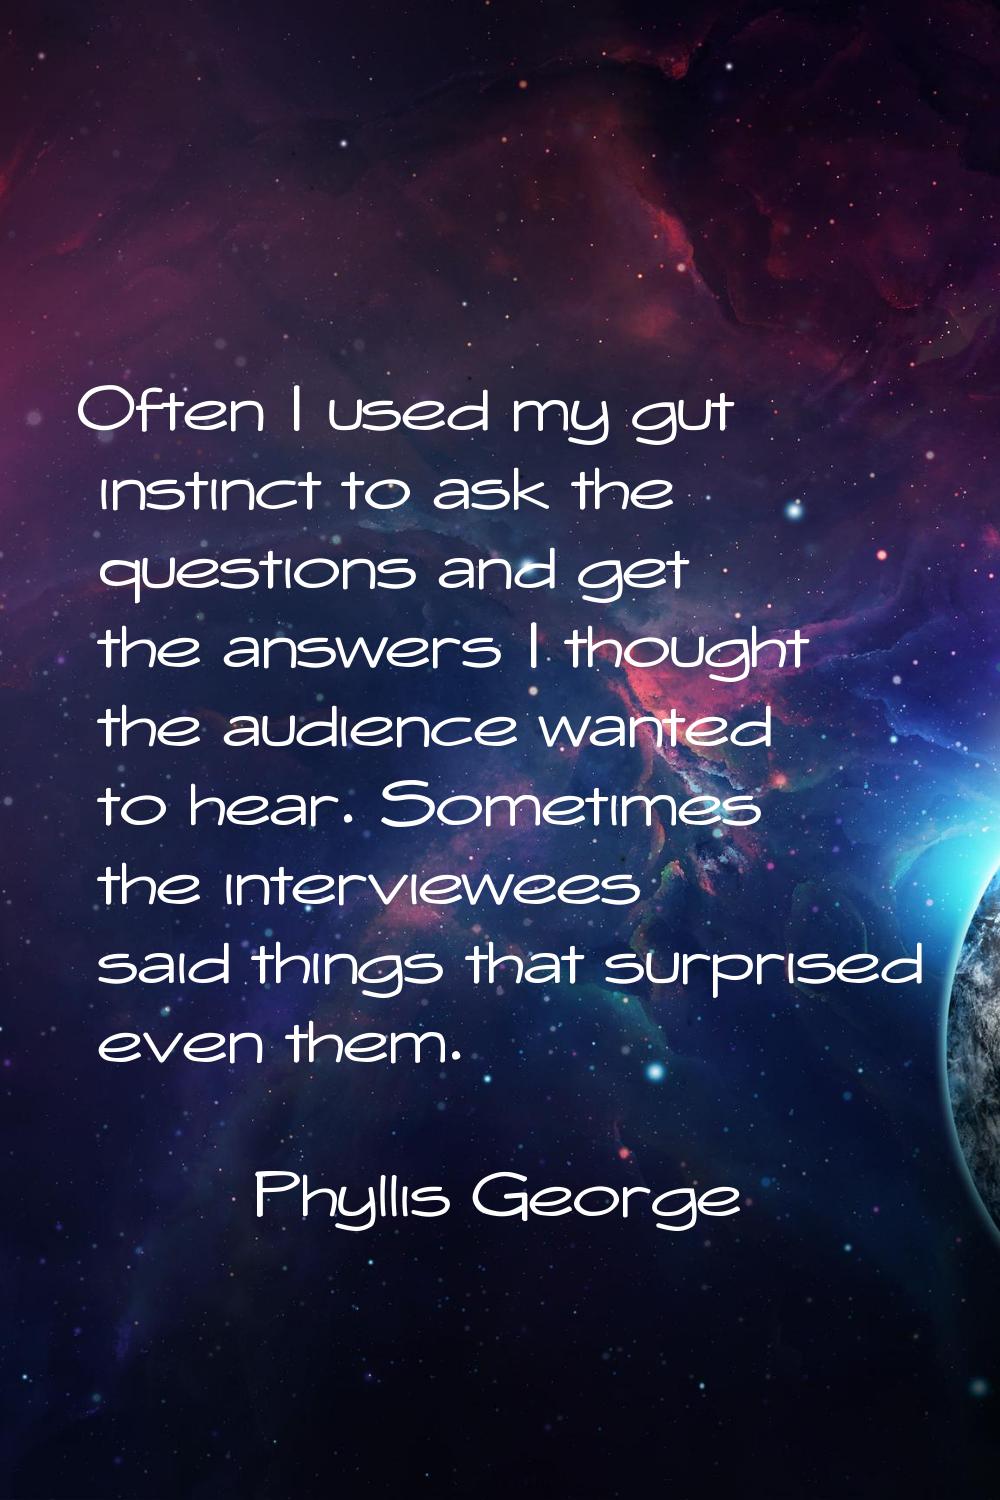 Often I used my gut instinct to ask the questions and get the answers I thought the audience wanted